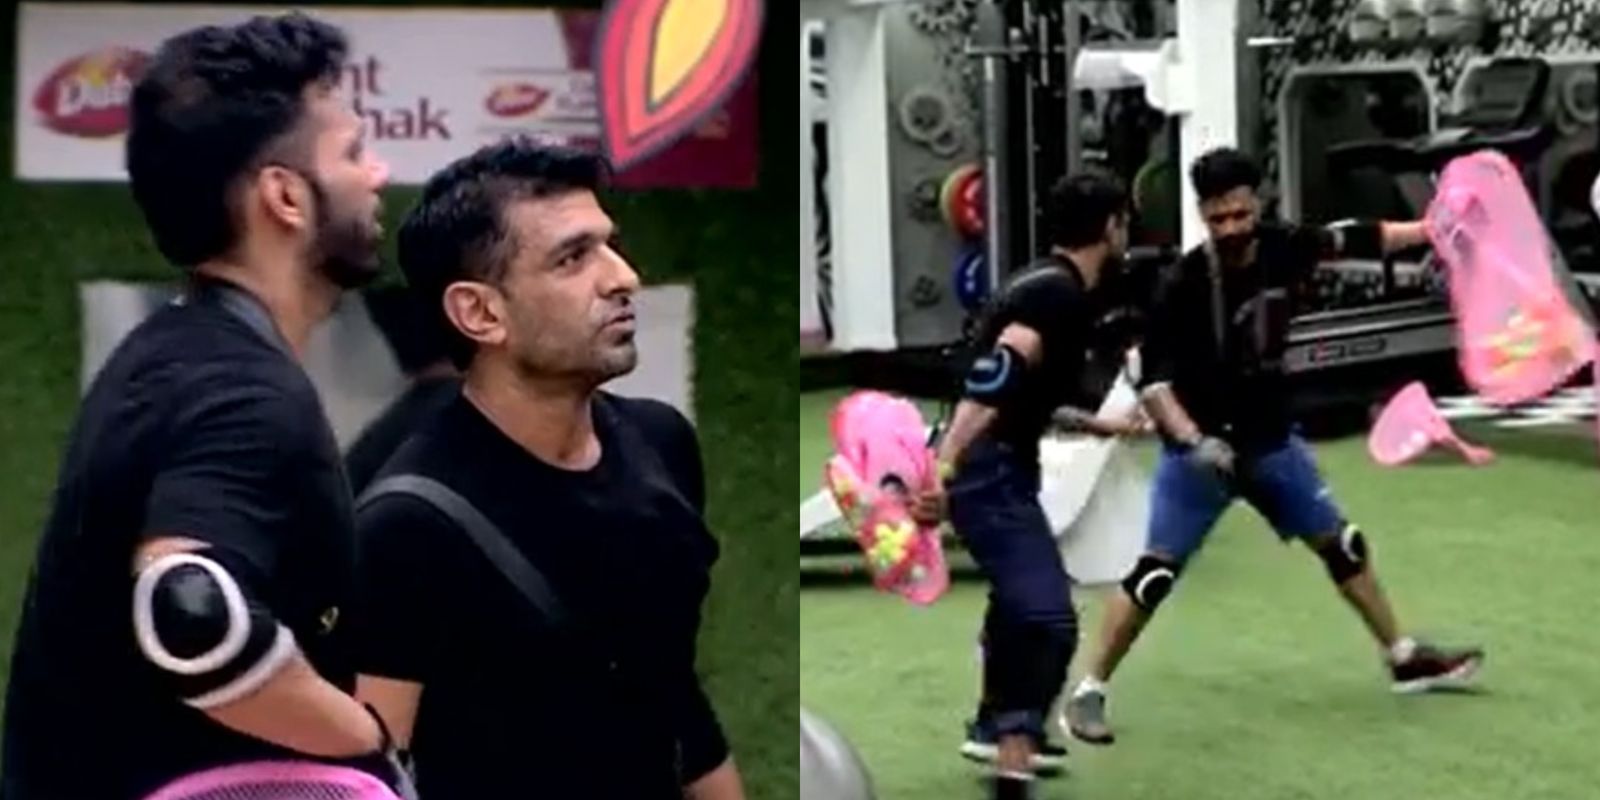 Bigg Boss 14: Netizens Are Disappointed With Rahul Vaidya For Age Shaming Eijaz Khan And Calling Him ‘Chacha’